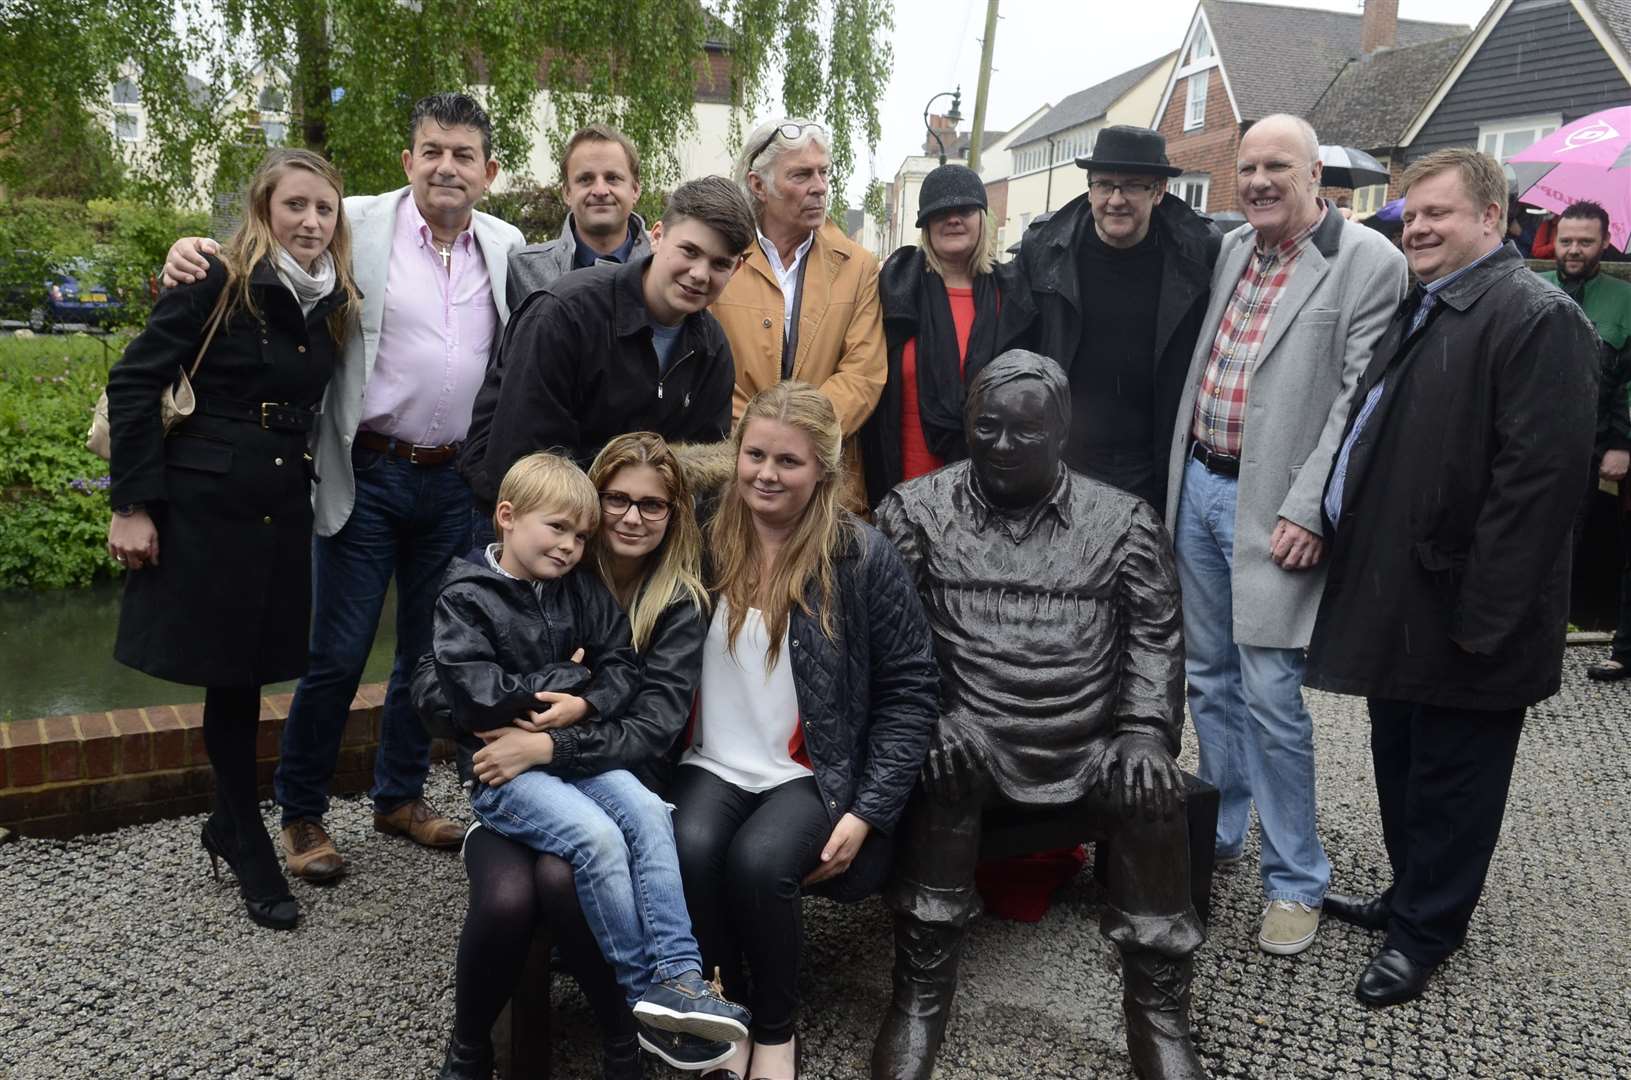 Family and friends around the statue of the late Dave Lee, unveiled in 2014